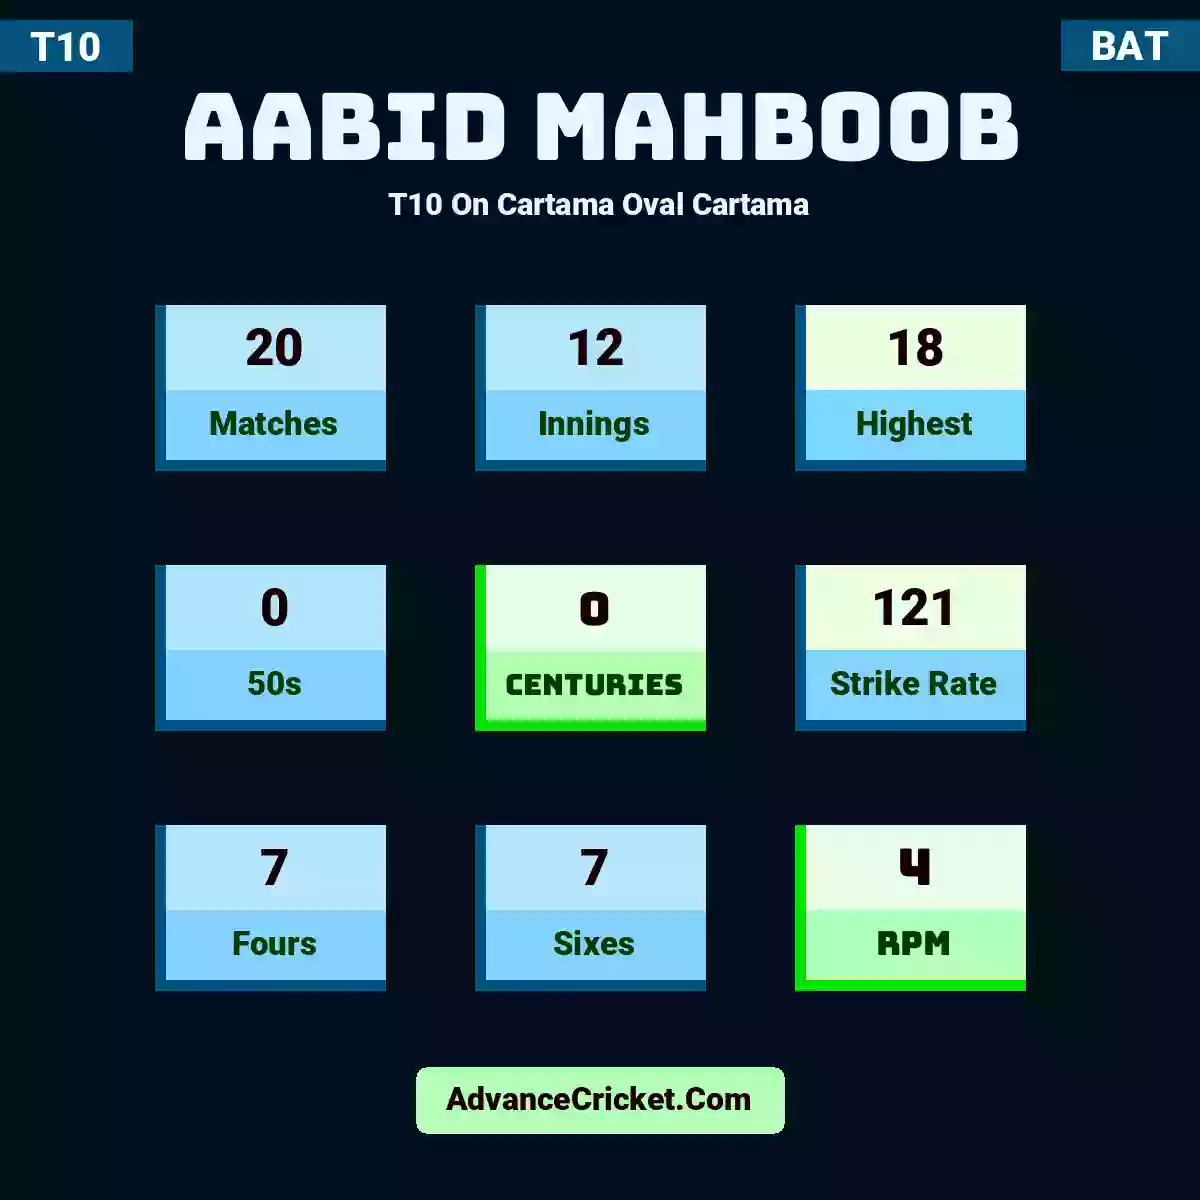 Aabid Mahboob T10  On Cartama Oval Cartama, Aabid Mahboob played 20 matches, scored 18 runs as highest, 0 half-centuries, and 0 centuries, with a strike rate of 121. A.Mahboob hit 7 fours and 7 sixes, with an RPM of 4.